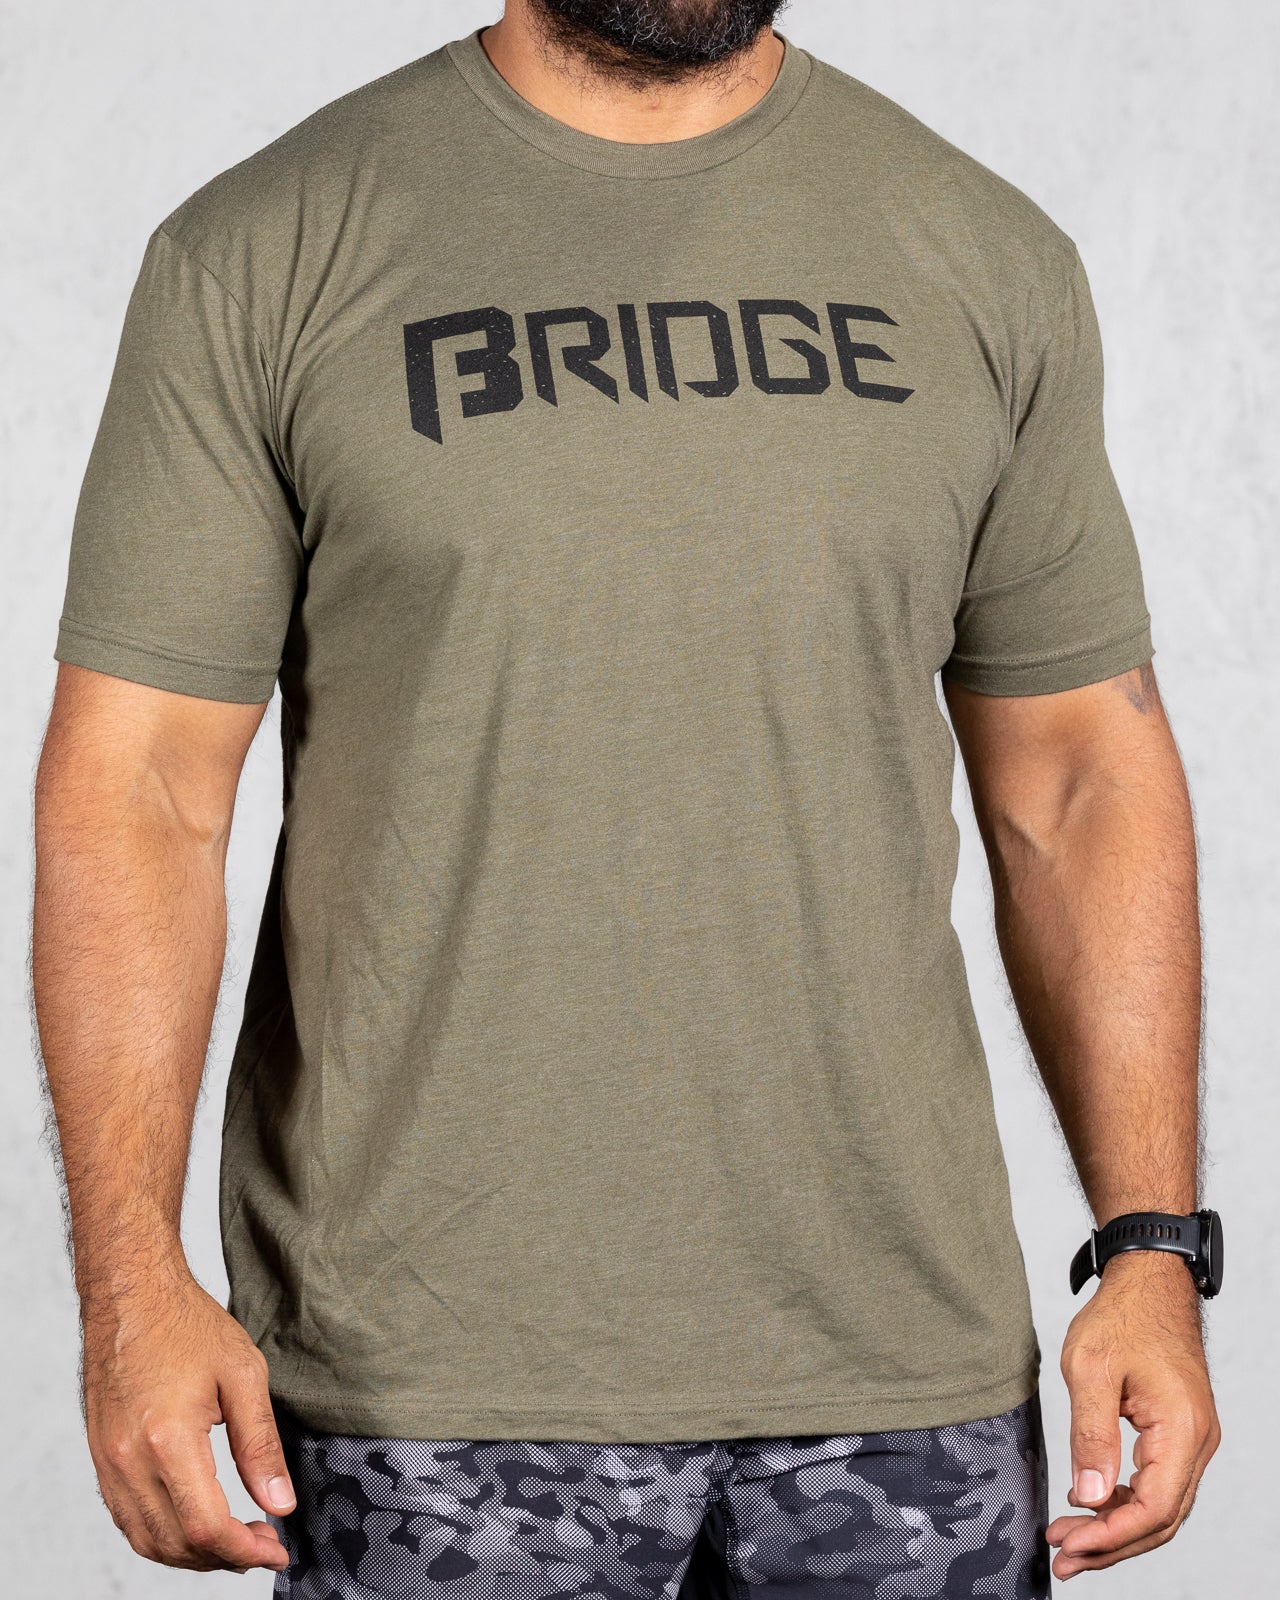 man wearing military green squad tee with bridge on the front